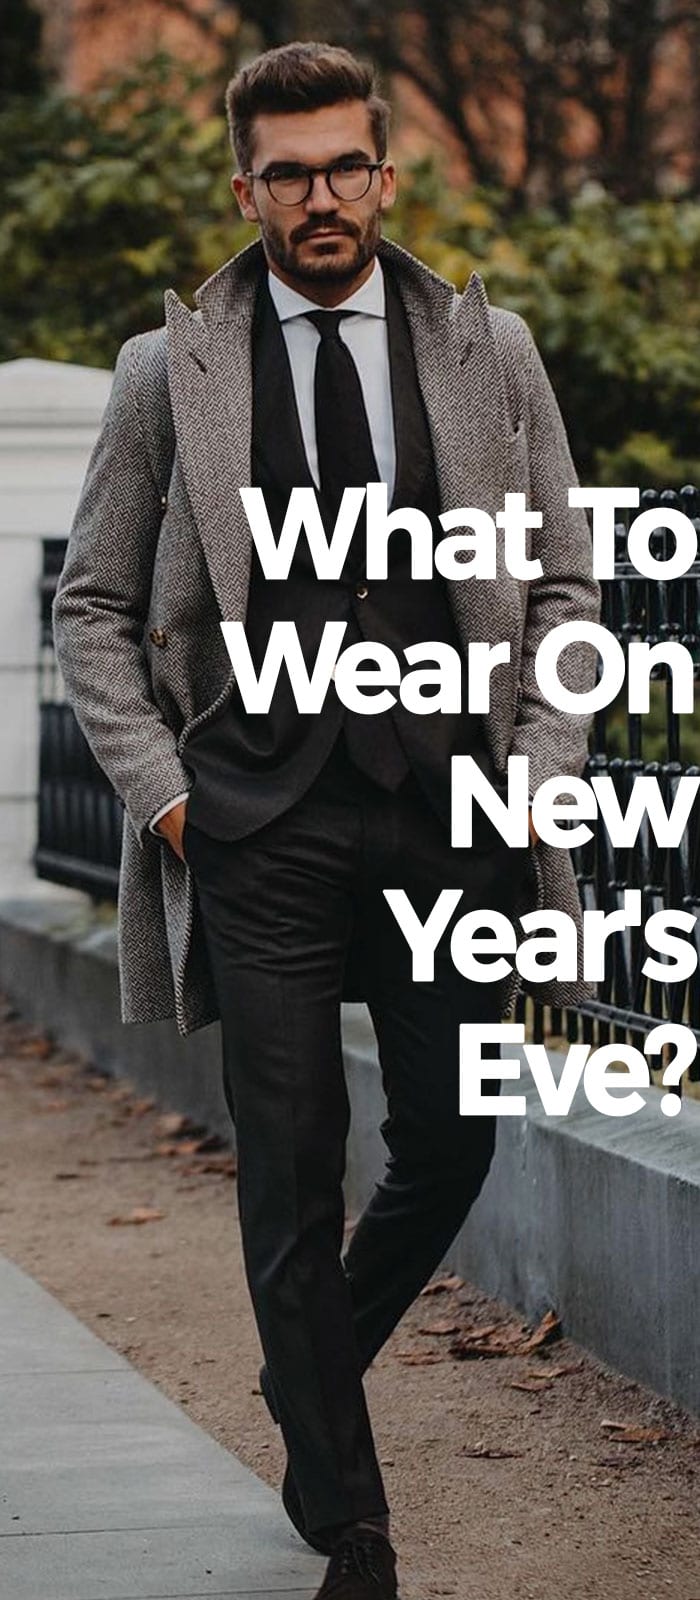 What To Wear On New Years Eve.